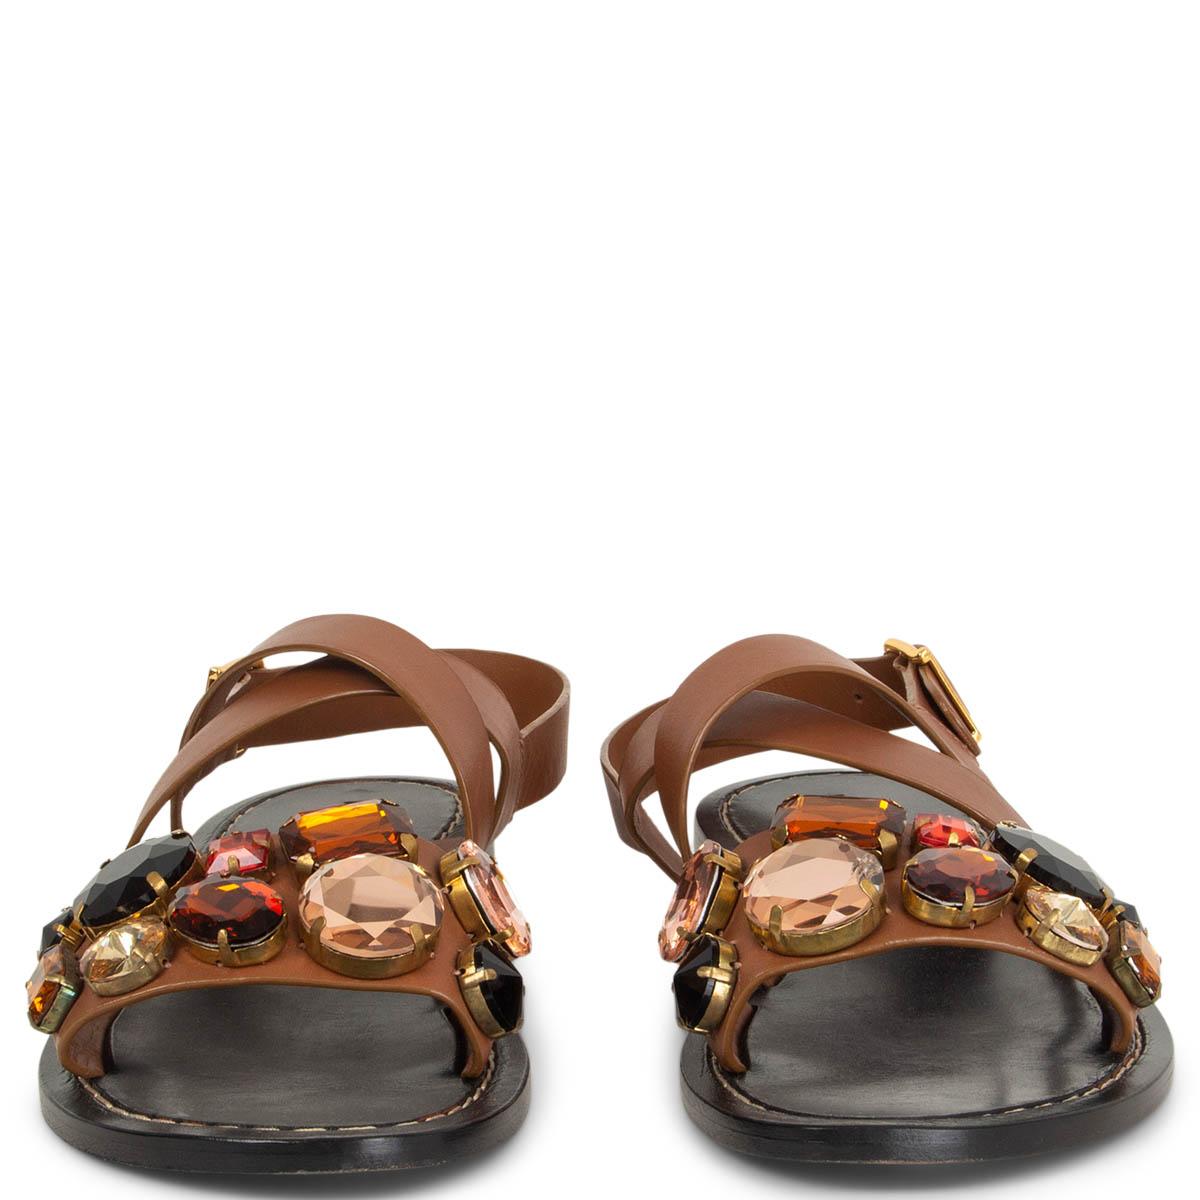 100% authentic Marni slingback sandals in brown leather embellished with oversized crystals. Have been worn once or twice and are in excellent condition. Come with dust bag. 

Measurements
Imprinted Size	37
Shoe Size	37
Inside Sole	24cm